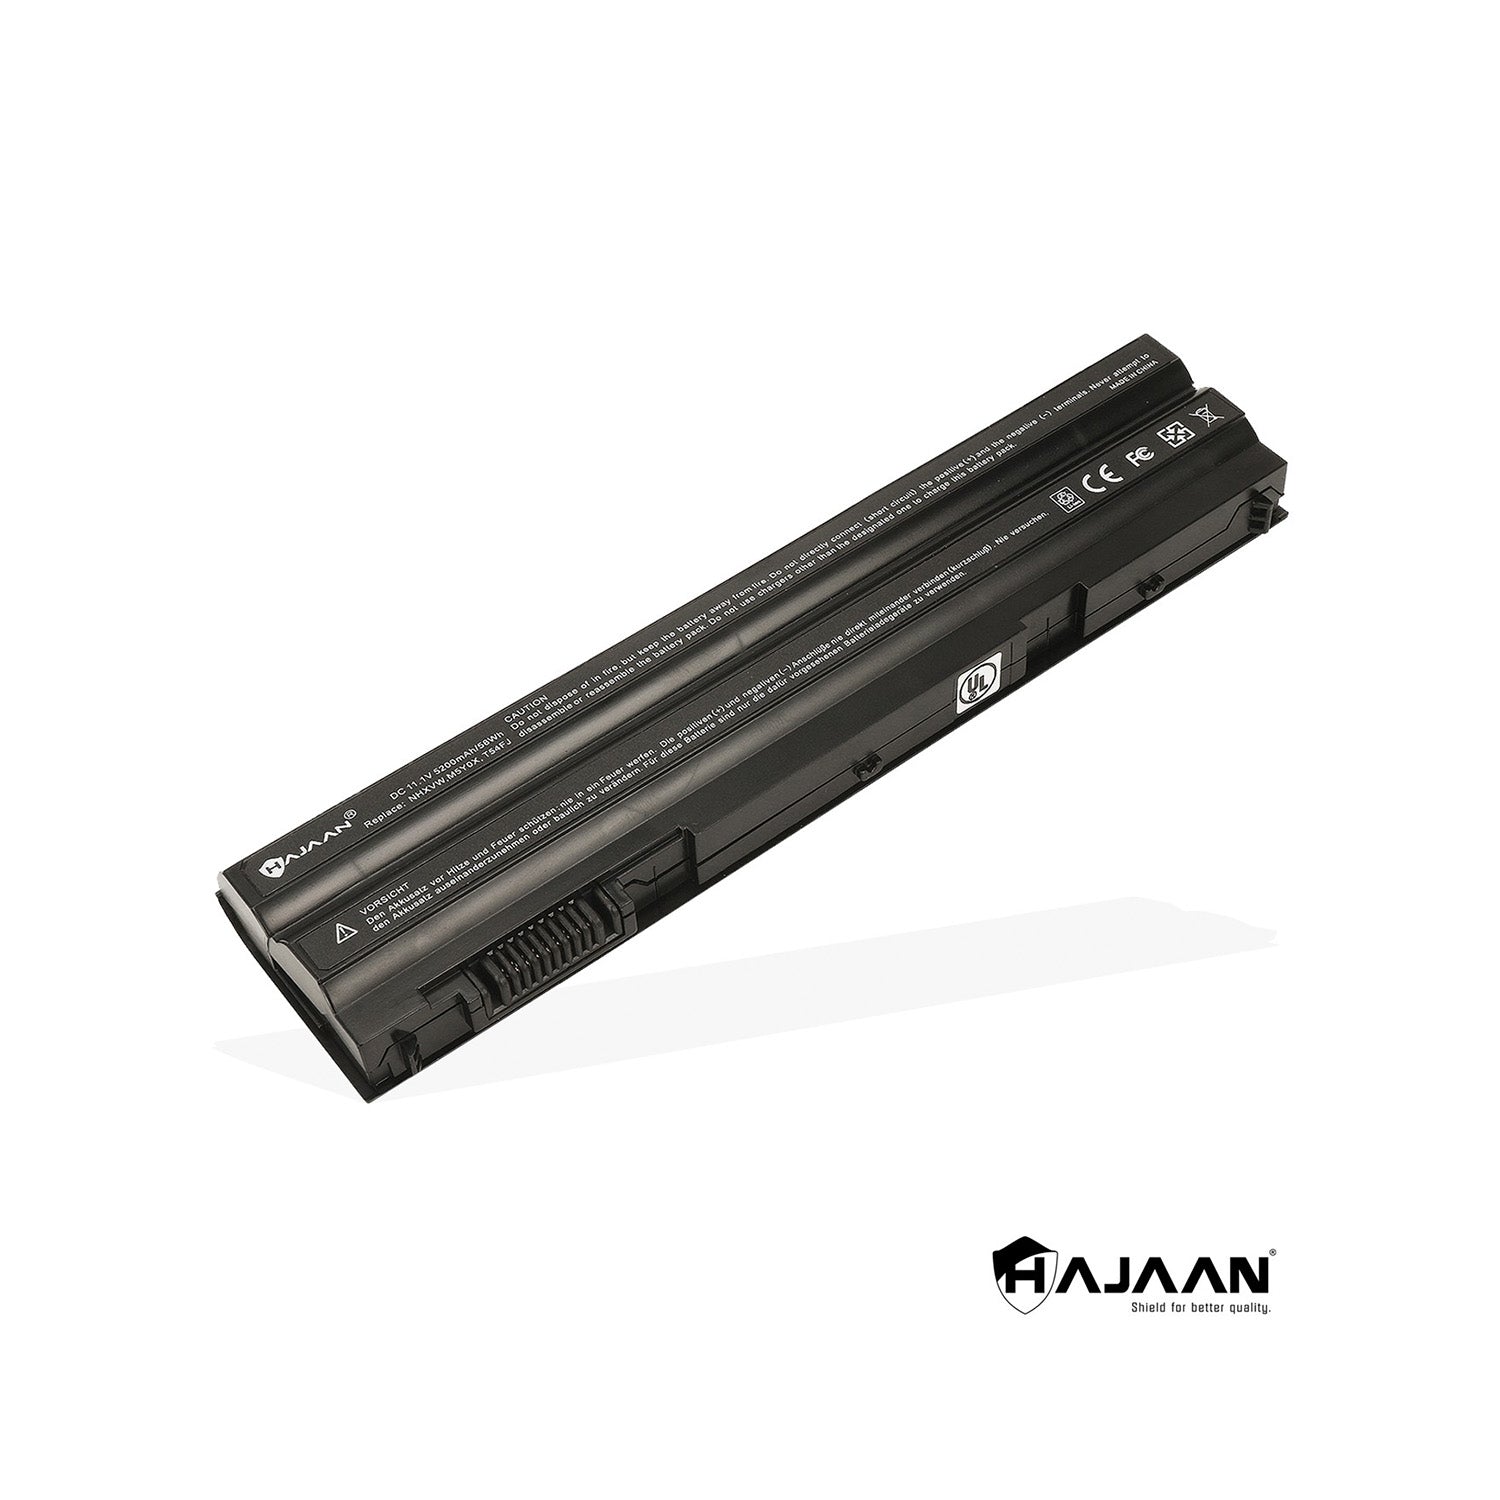 HAJAAN New Genuine Laptop Battery for DELL Latitude E6430 E6420 E6520 E6530 E5430 E5520 E5420 E5530 T54FJ M5Y0X -High Performance (Li-ion, 5200mAh / 58Wh, 6-Cells,11.1V) 1 Year Warranty